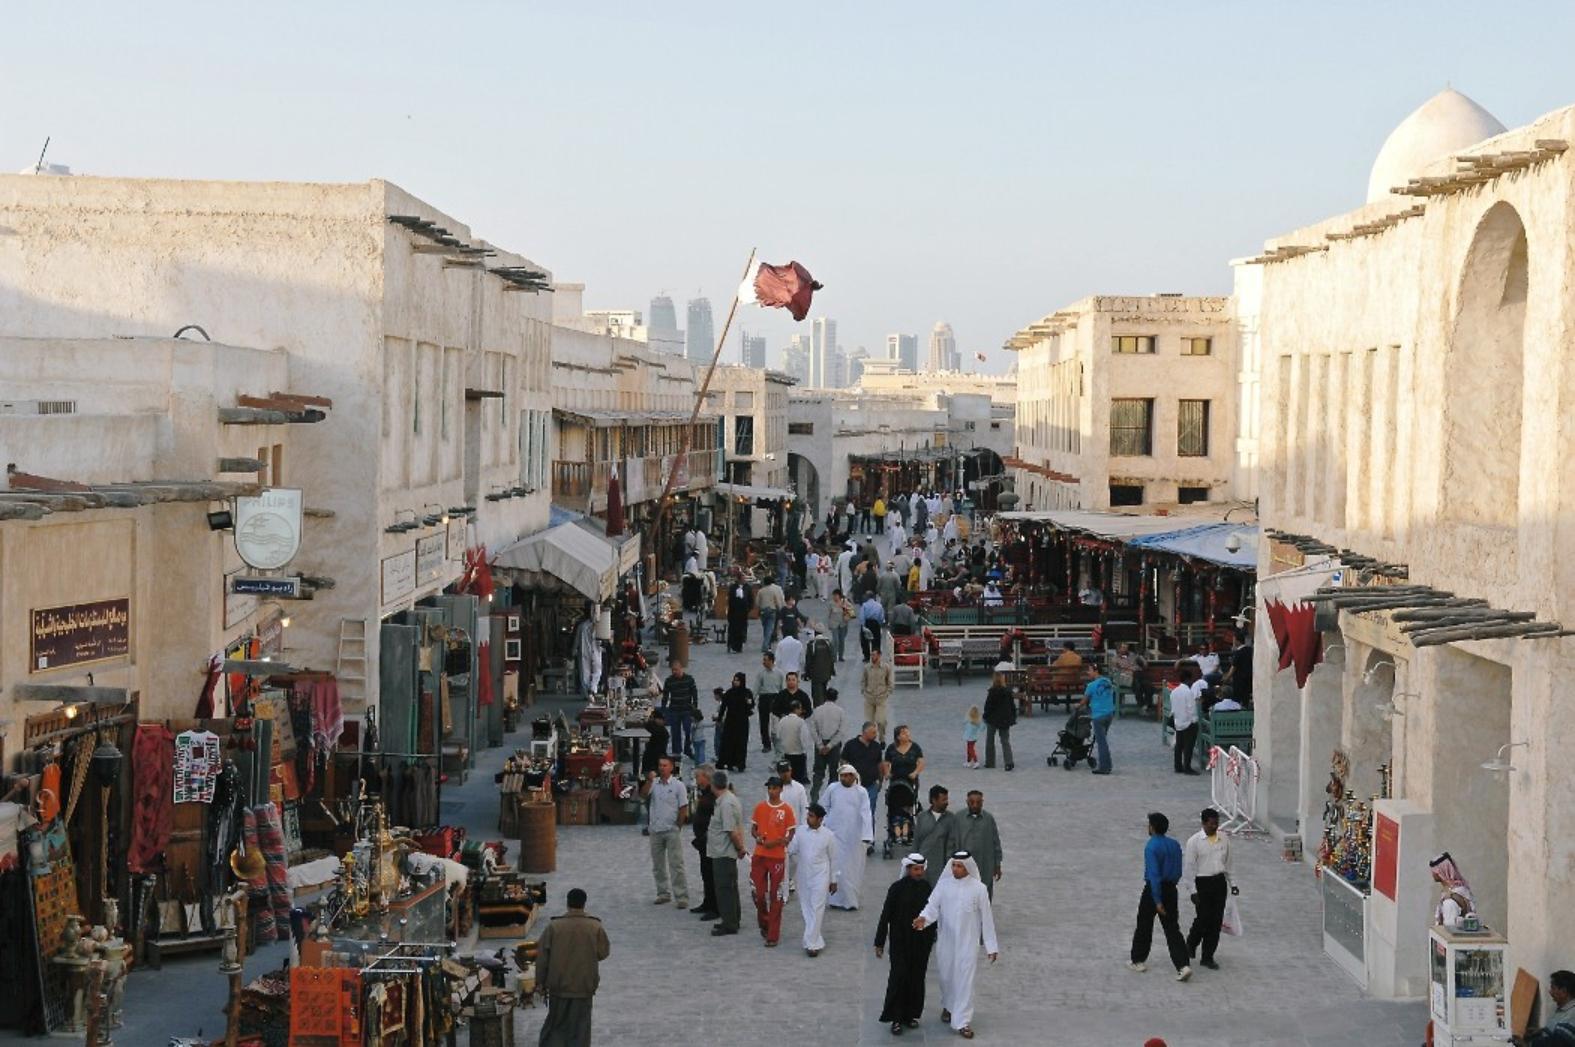 Guided Walking Tour of Souq Waqif – With hotel transfer